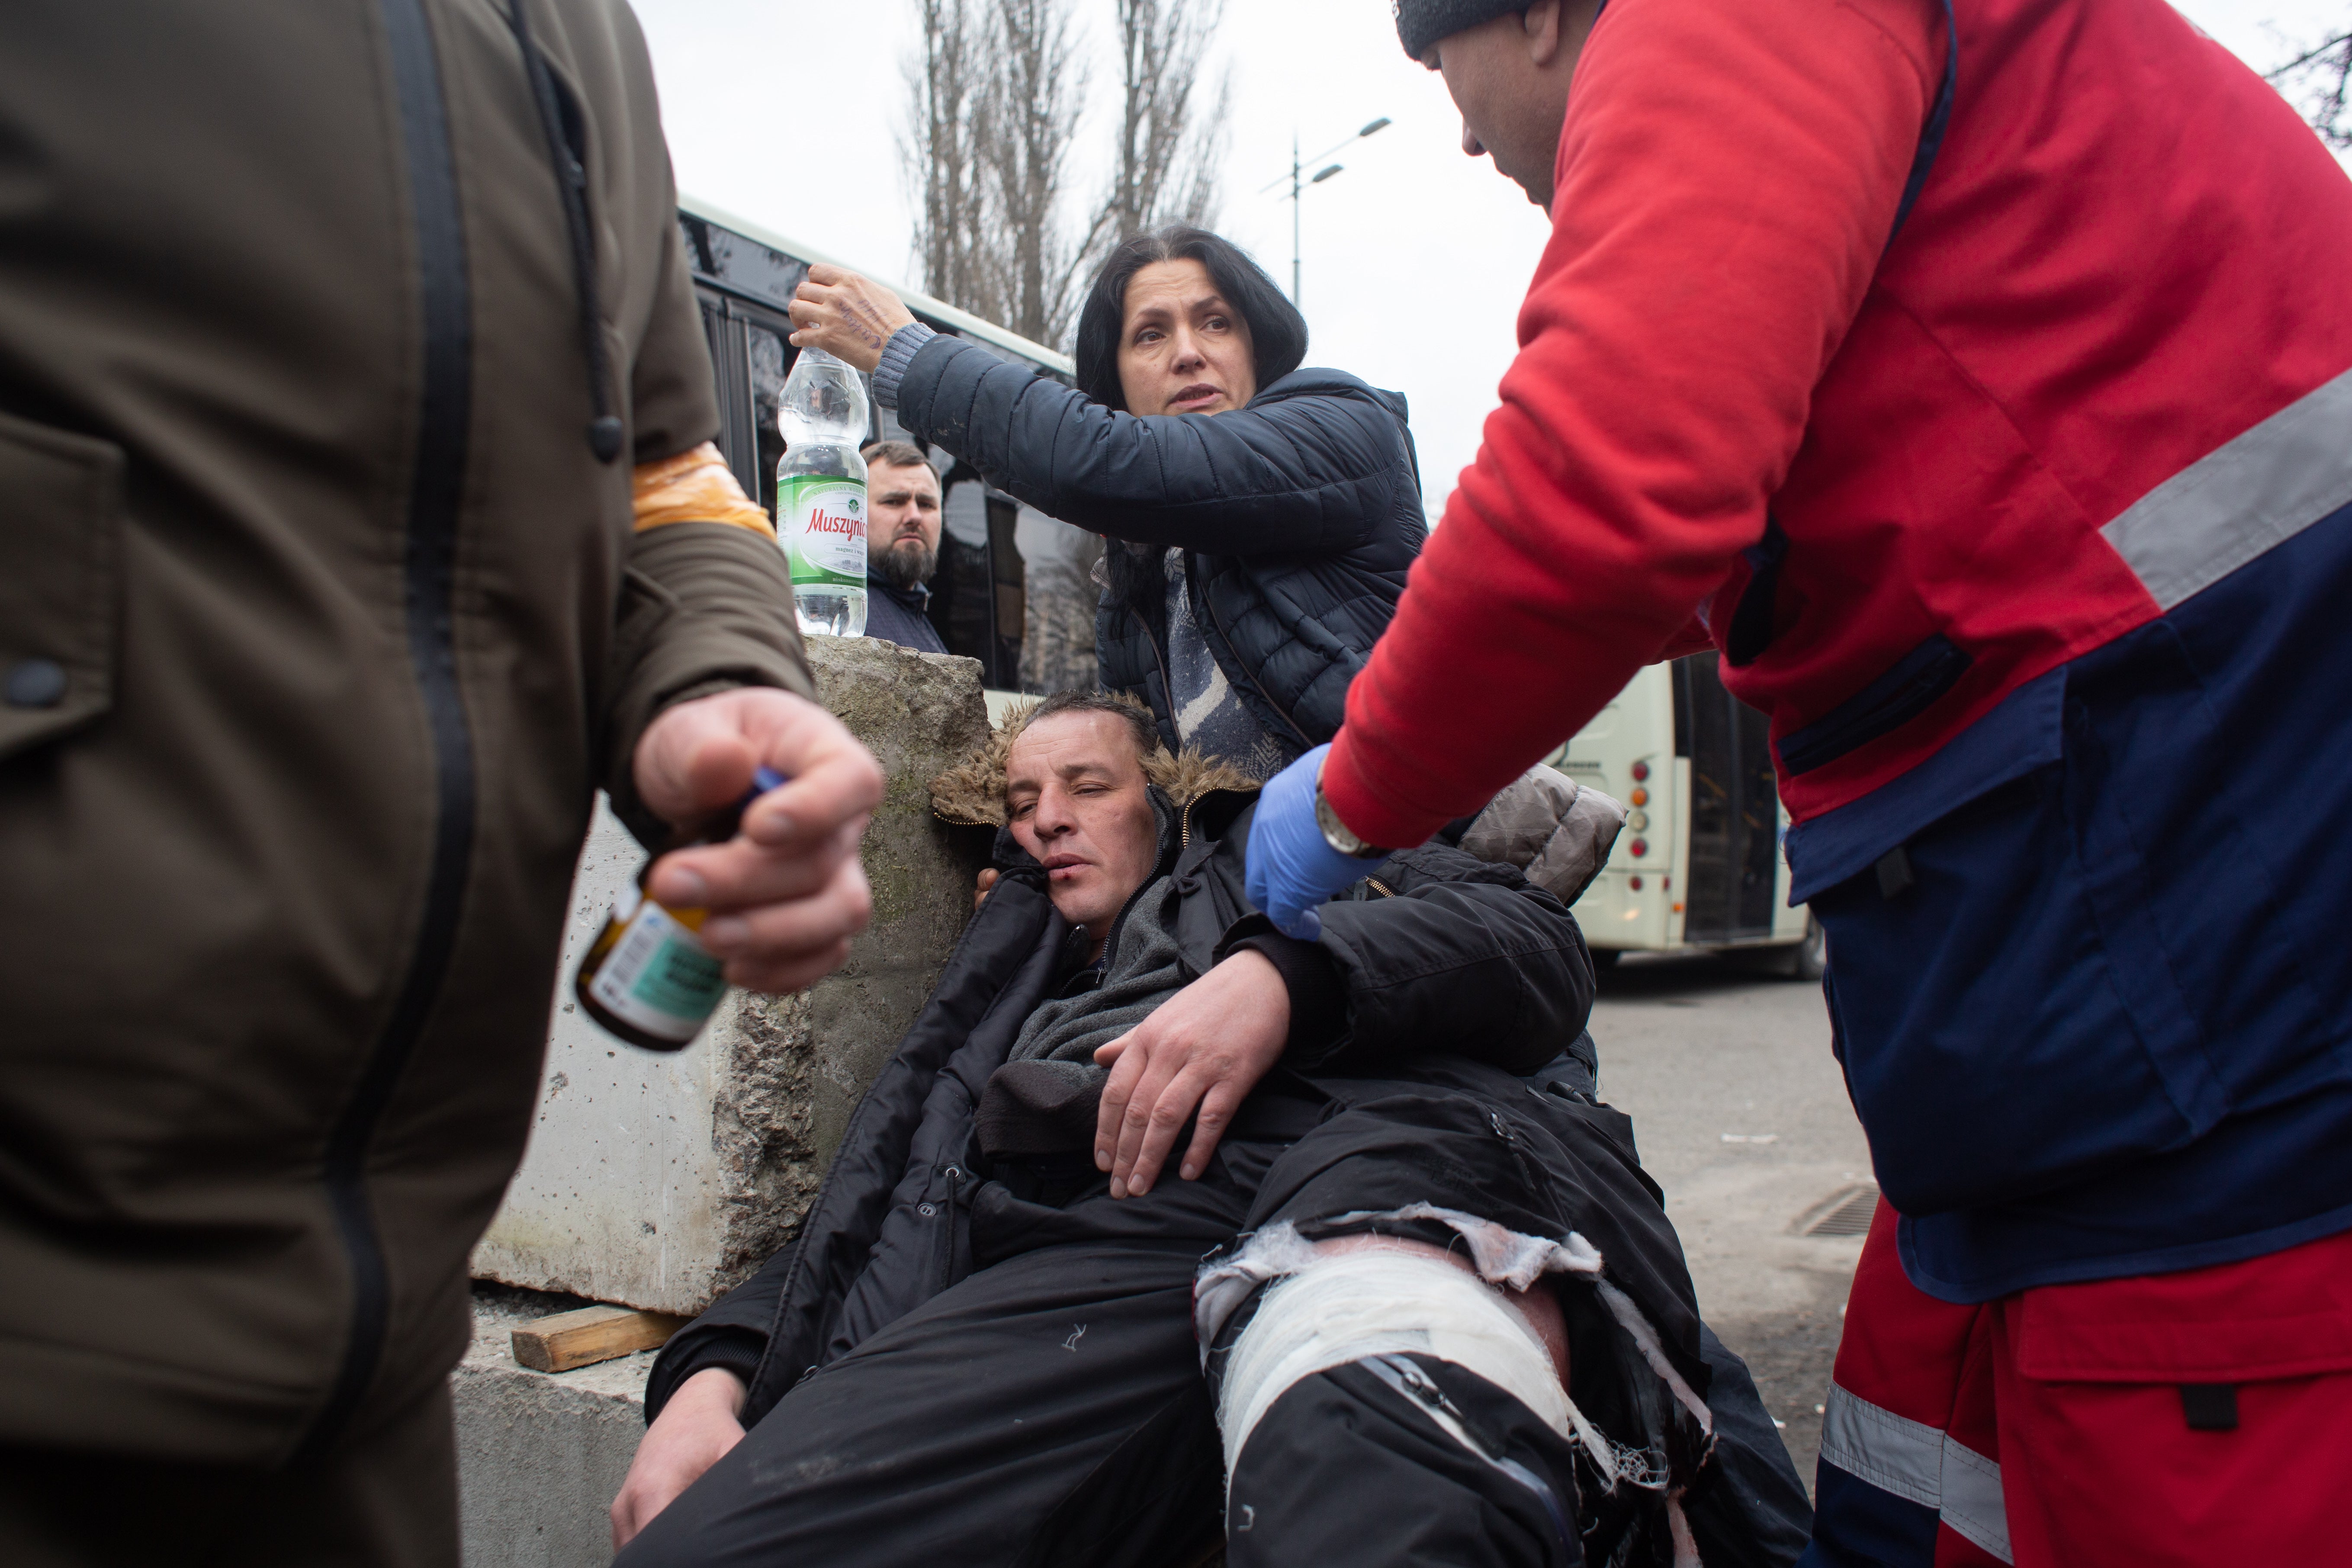 Yuriy, who who was shot in the leg while evacuating civilians from the shelled city of Irpin receives first aid on 6 March 2022